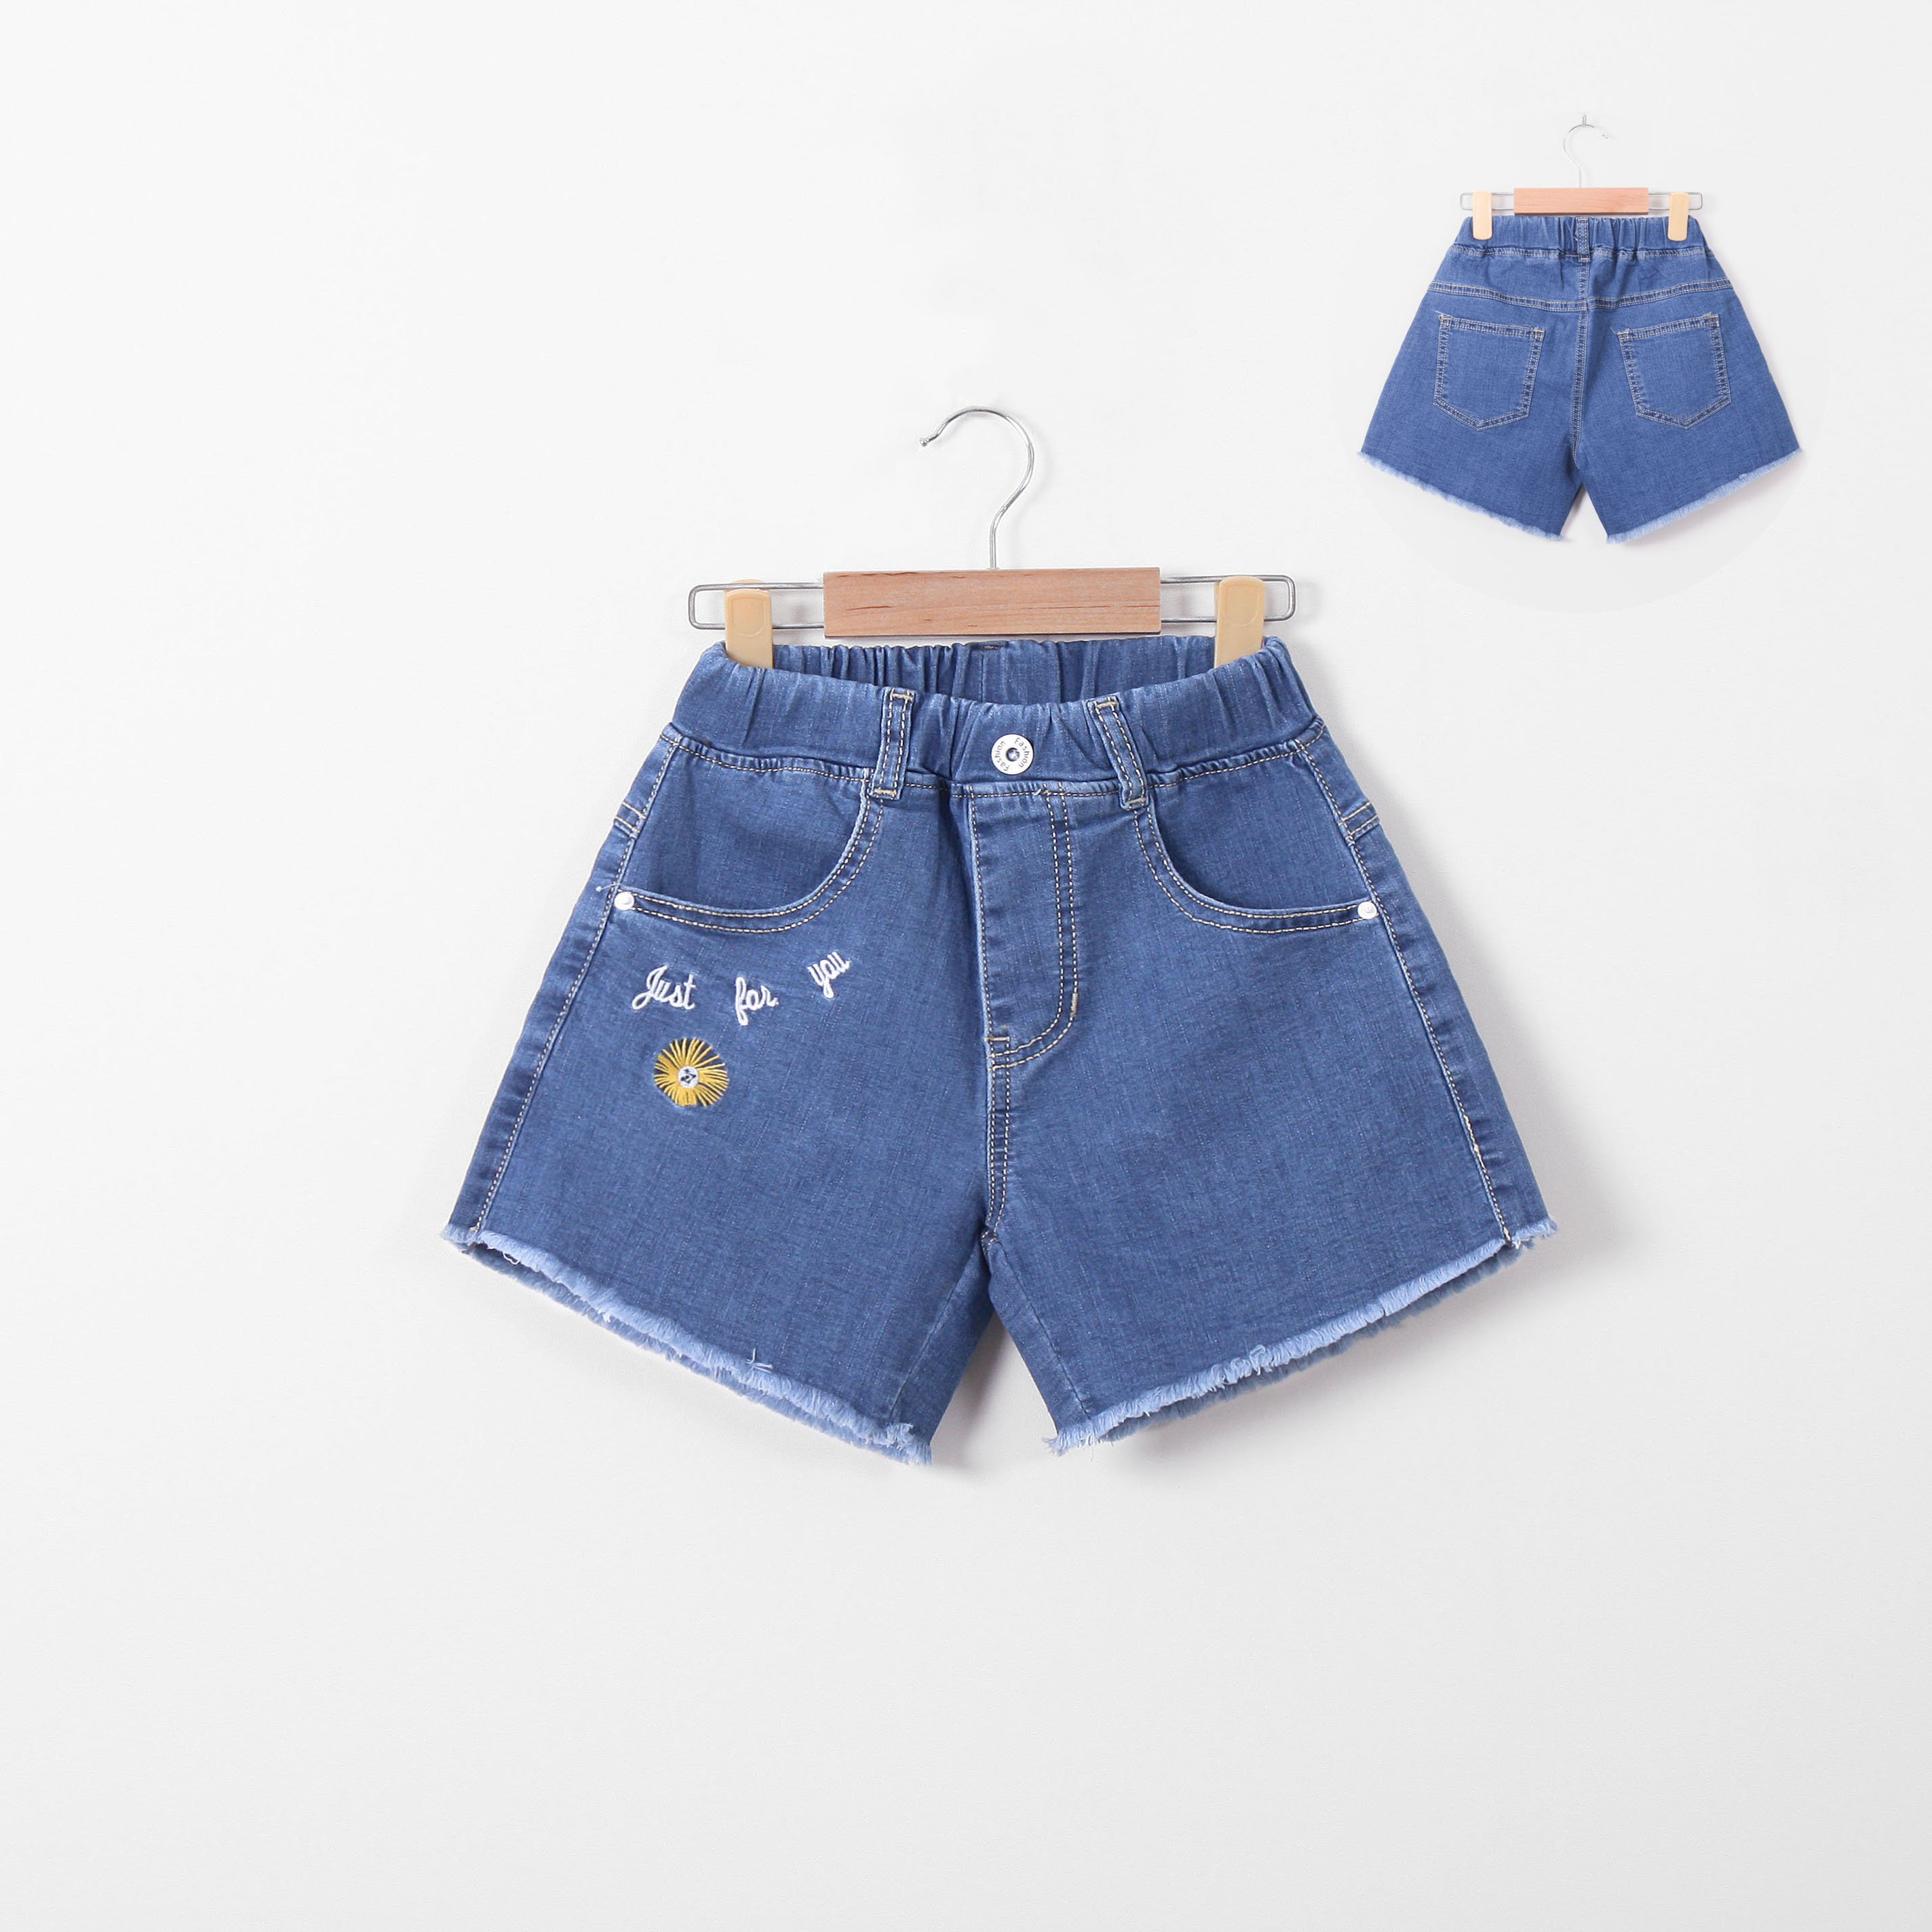 QUẦN SHORTS JEAN JUST FOR U